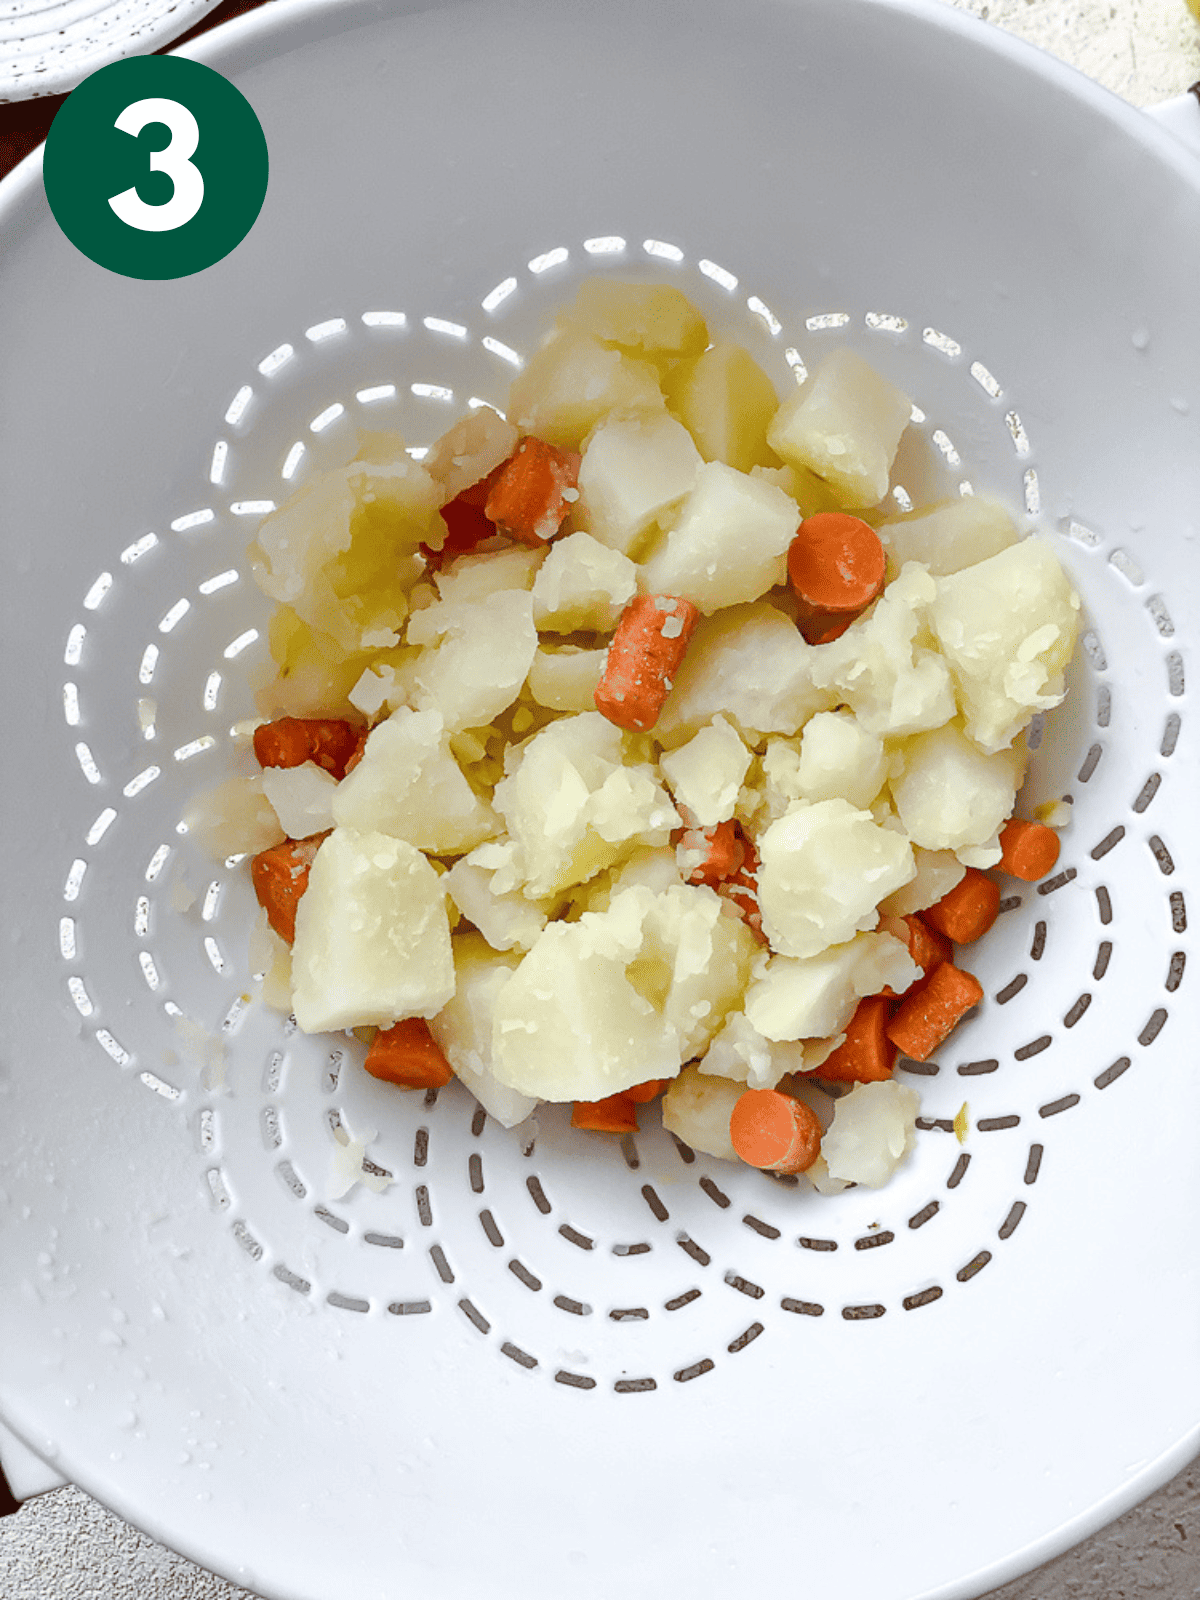 Boiled potatoes and carrots in a white strainer.